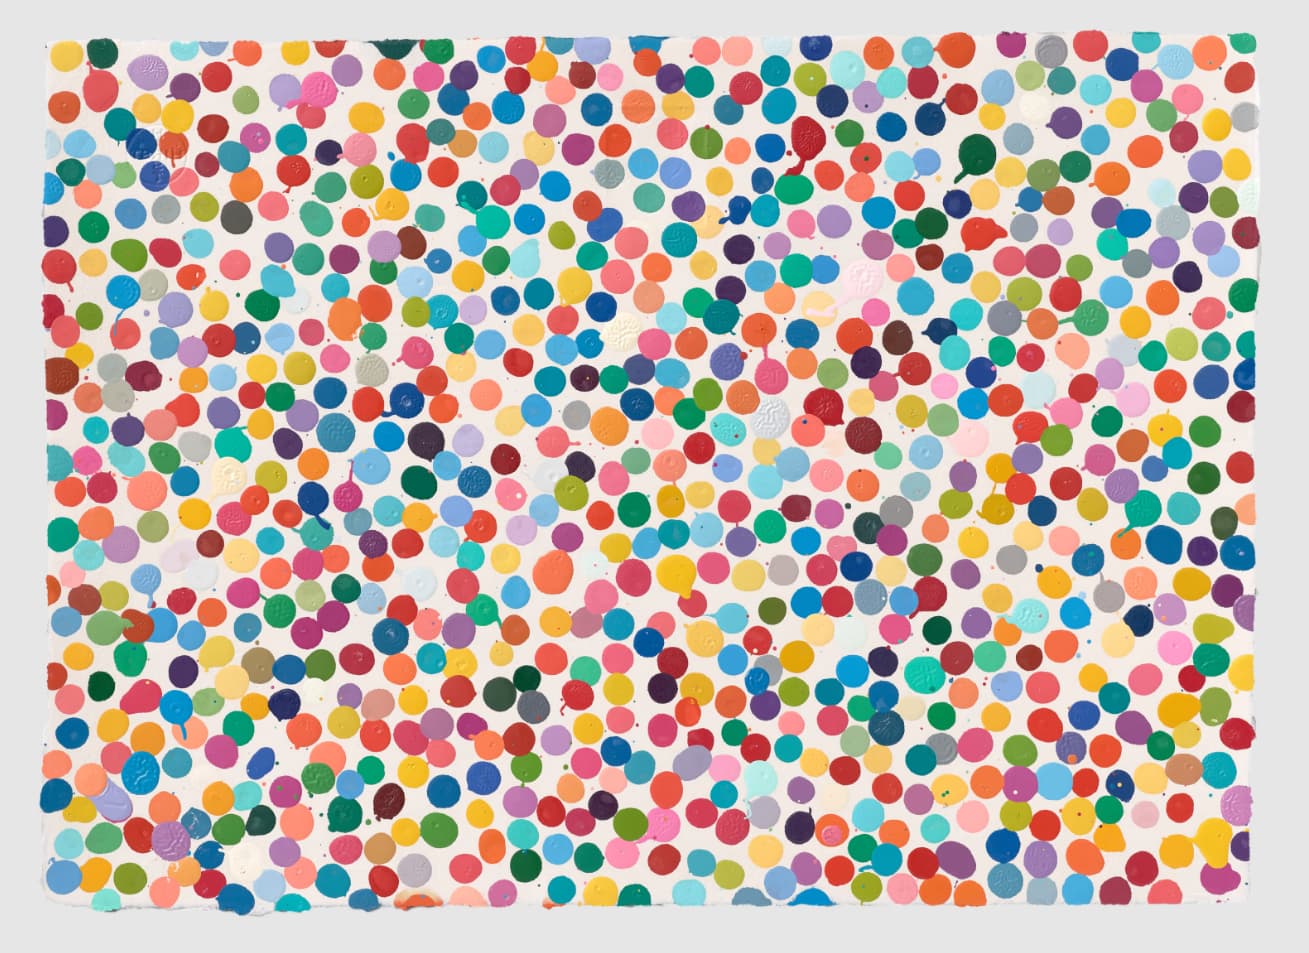 Damien Hirst, The Currency 403 "Green here, yellow there", 2021